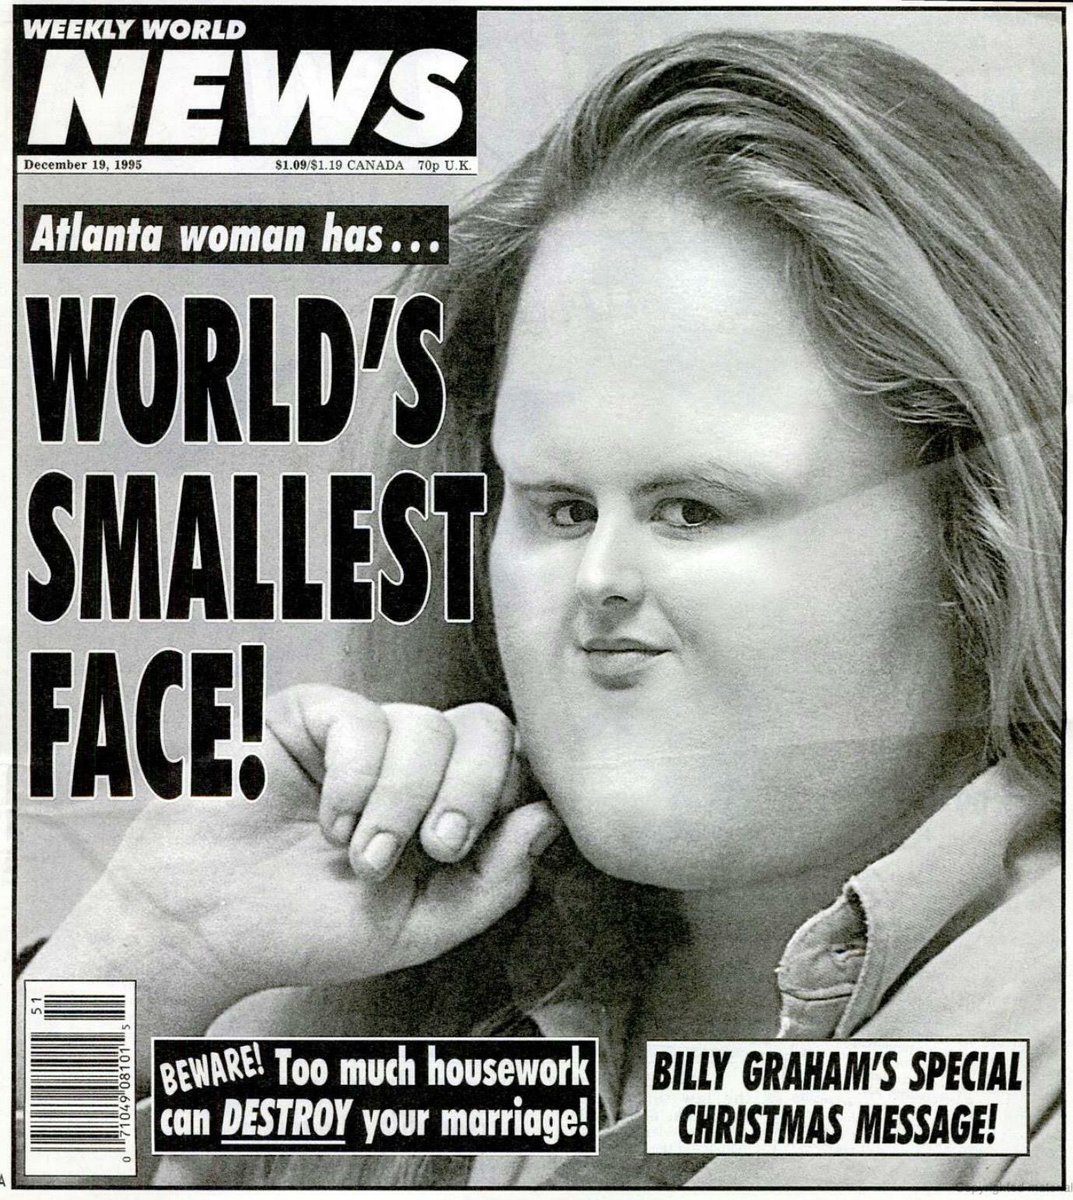 Image of woman with shrunken face from the cover of a Weekly World News Tabloid